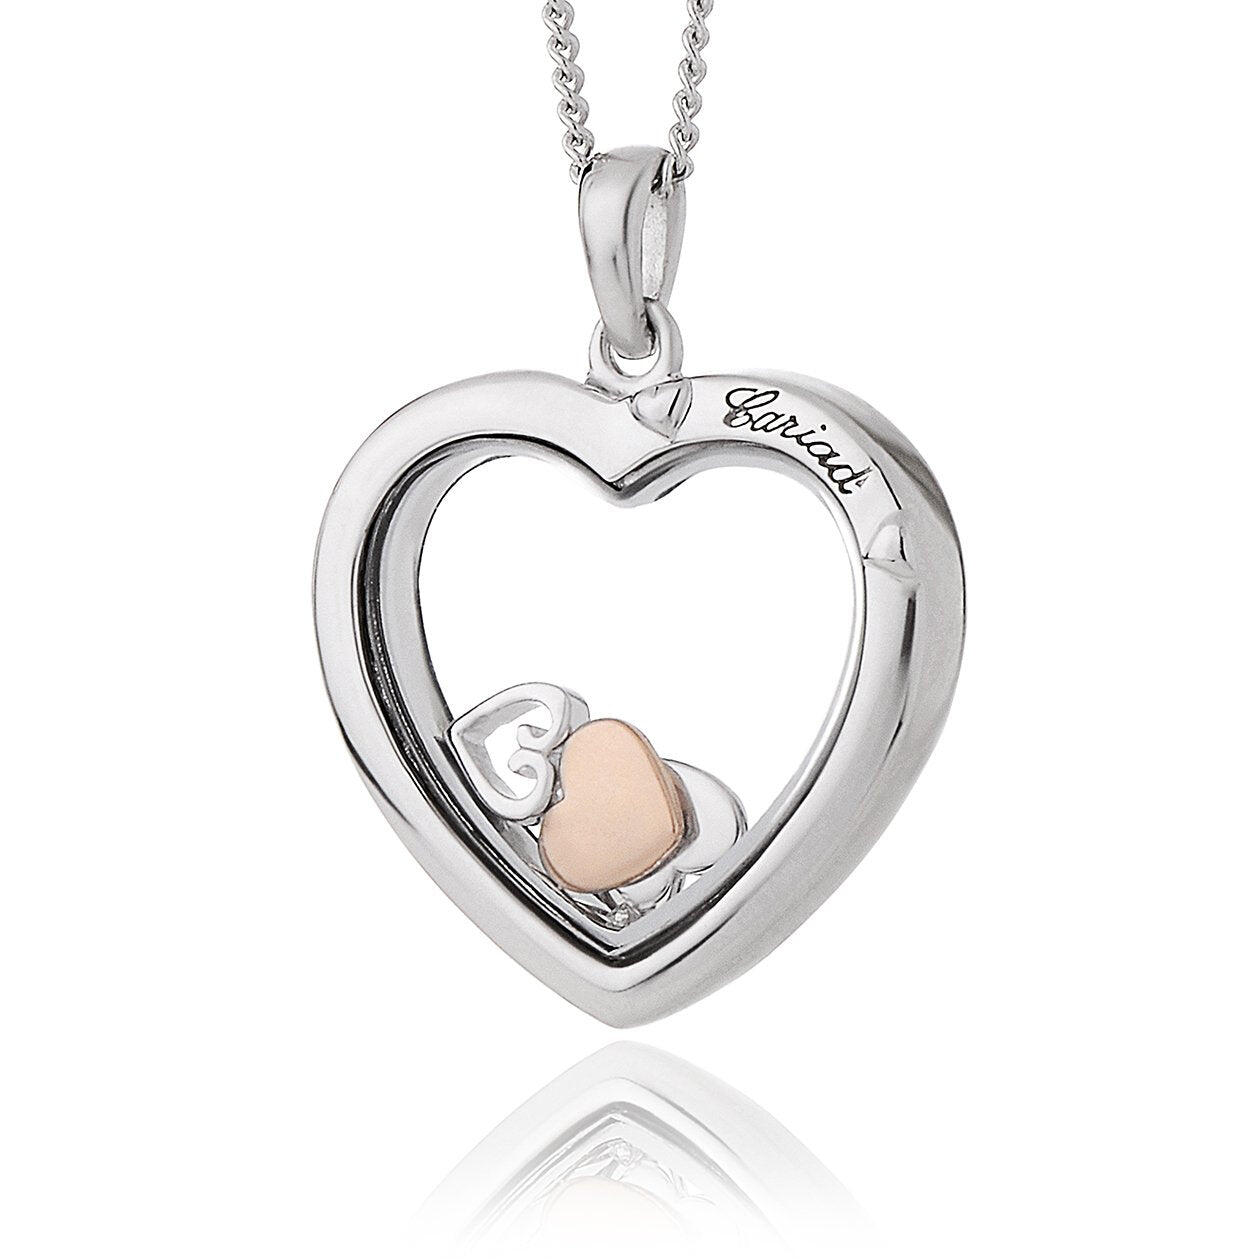 Clogau Cariad Inner Charm Sterling Silver Heart Necklace - Default / Silver